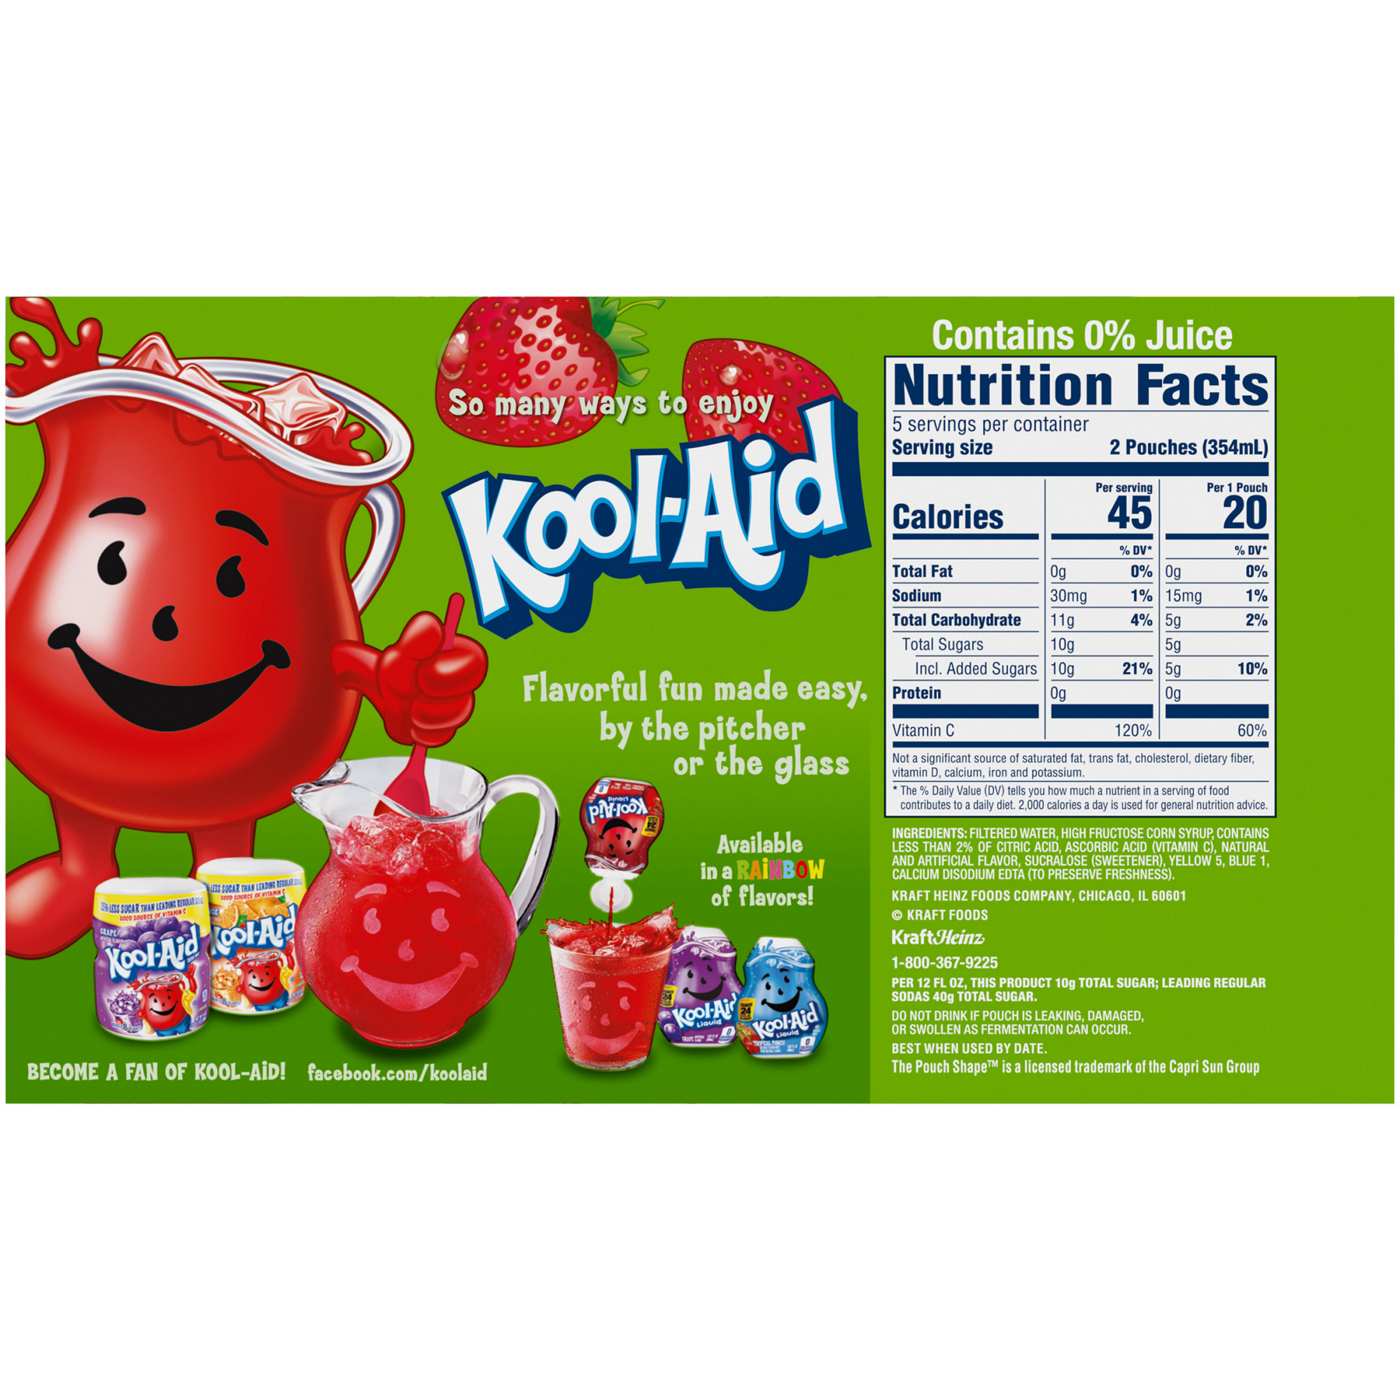 Kool-Aid Jammers Strawberry Kiwi Flavored Drink 6 oz Pouches; image 6 of 7